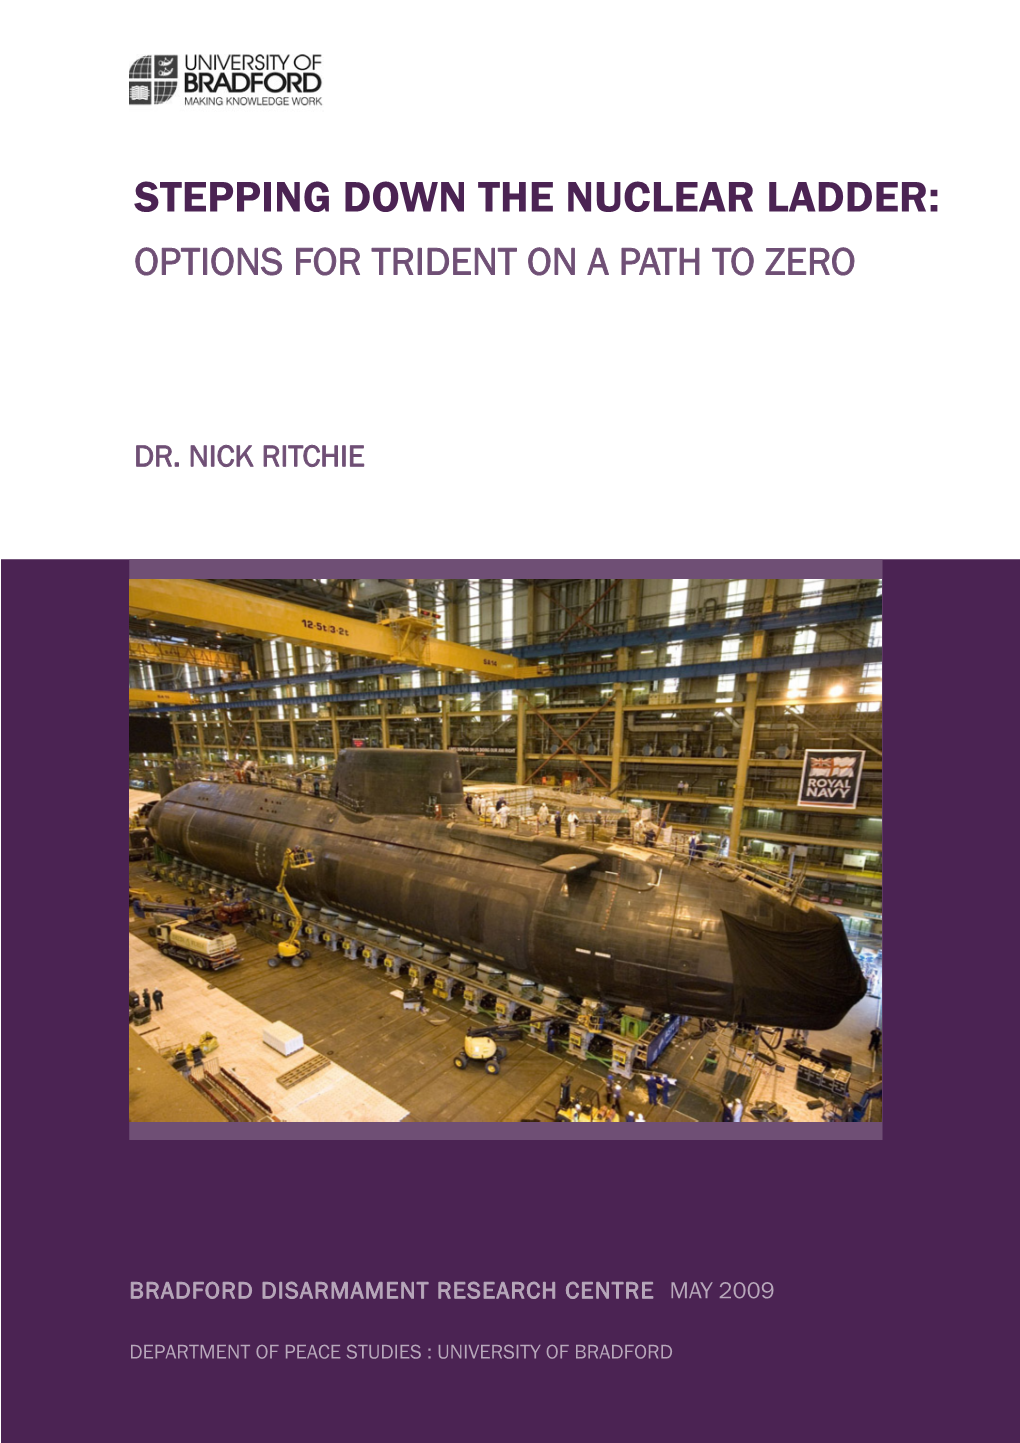 Options for Trident on a Path to Zero